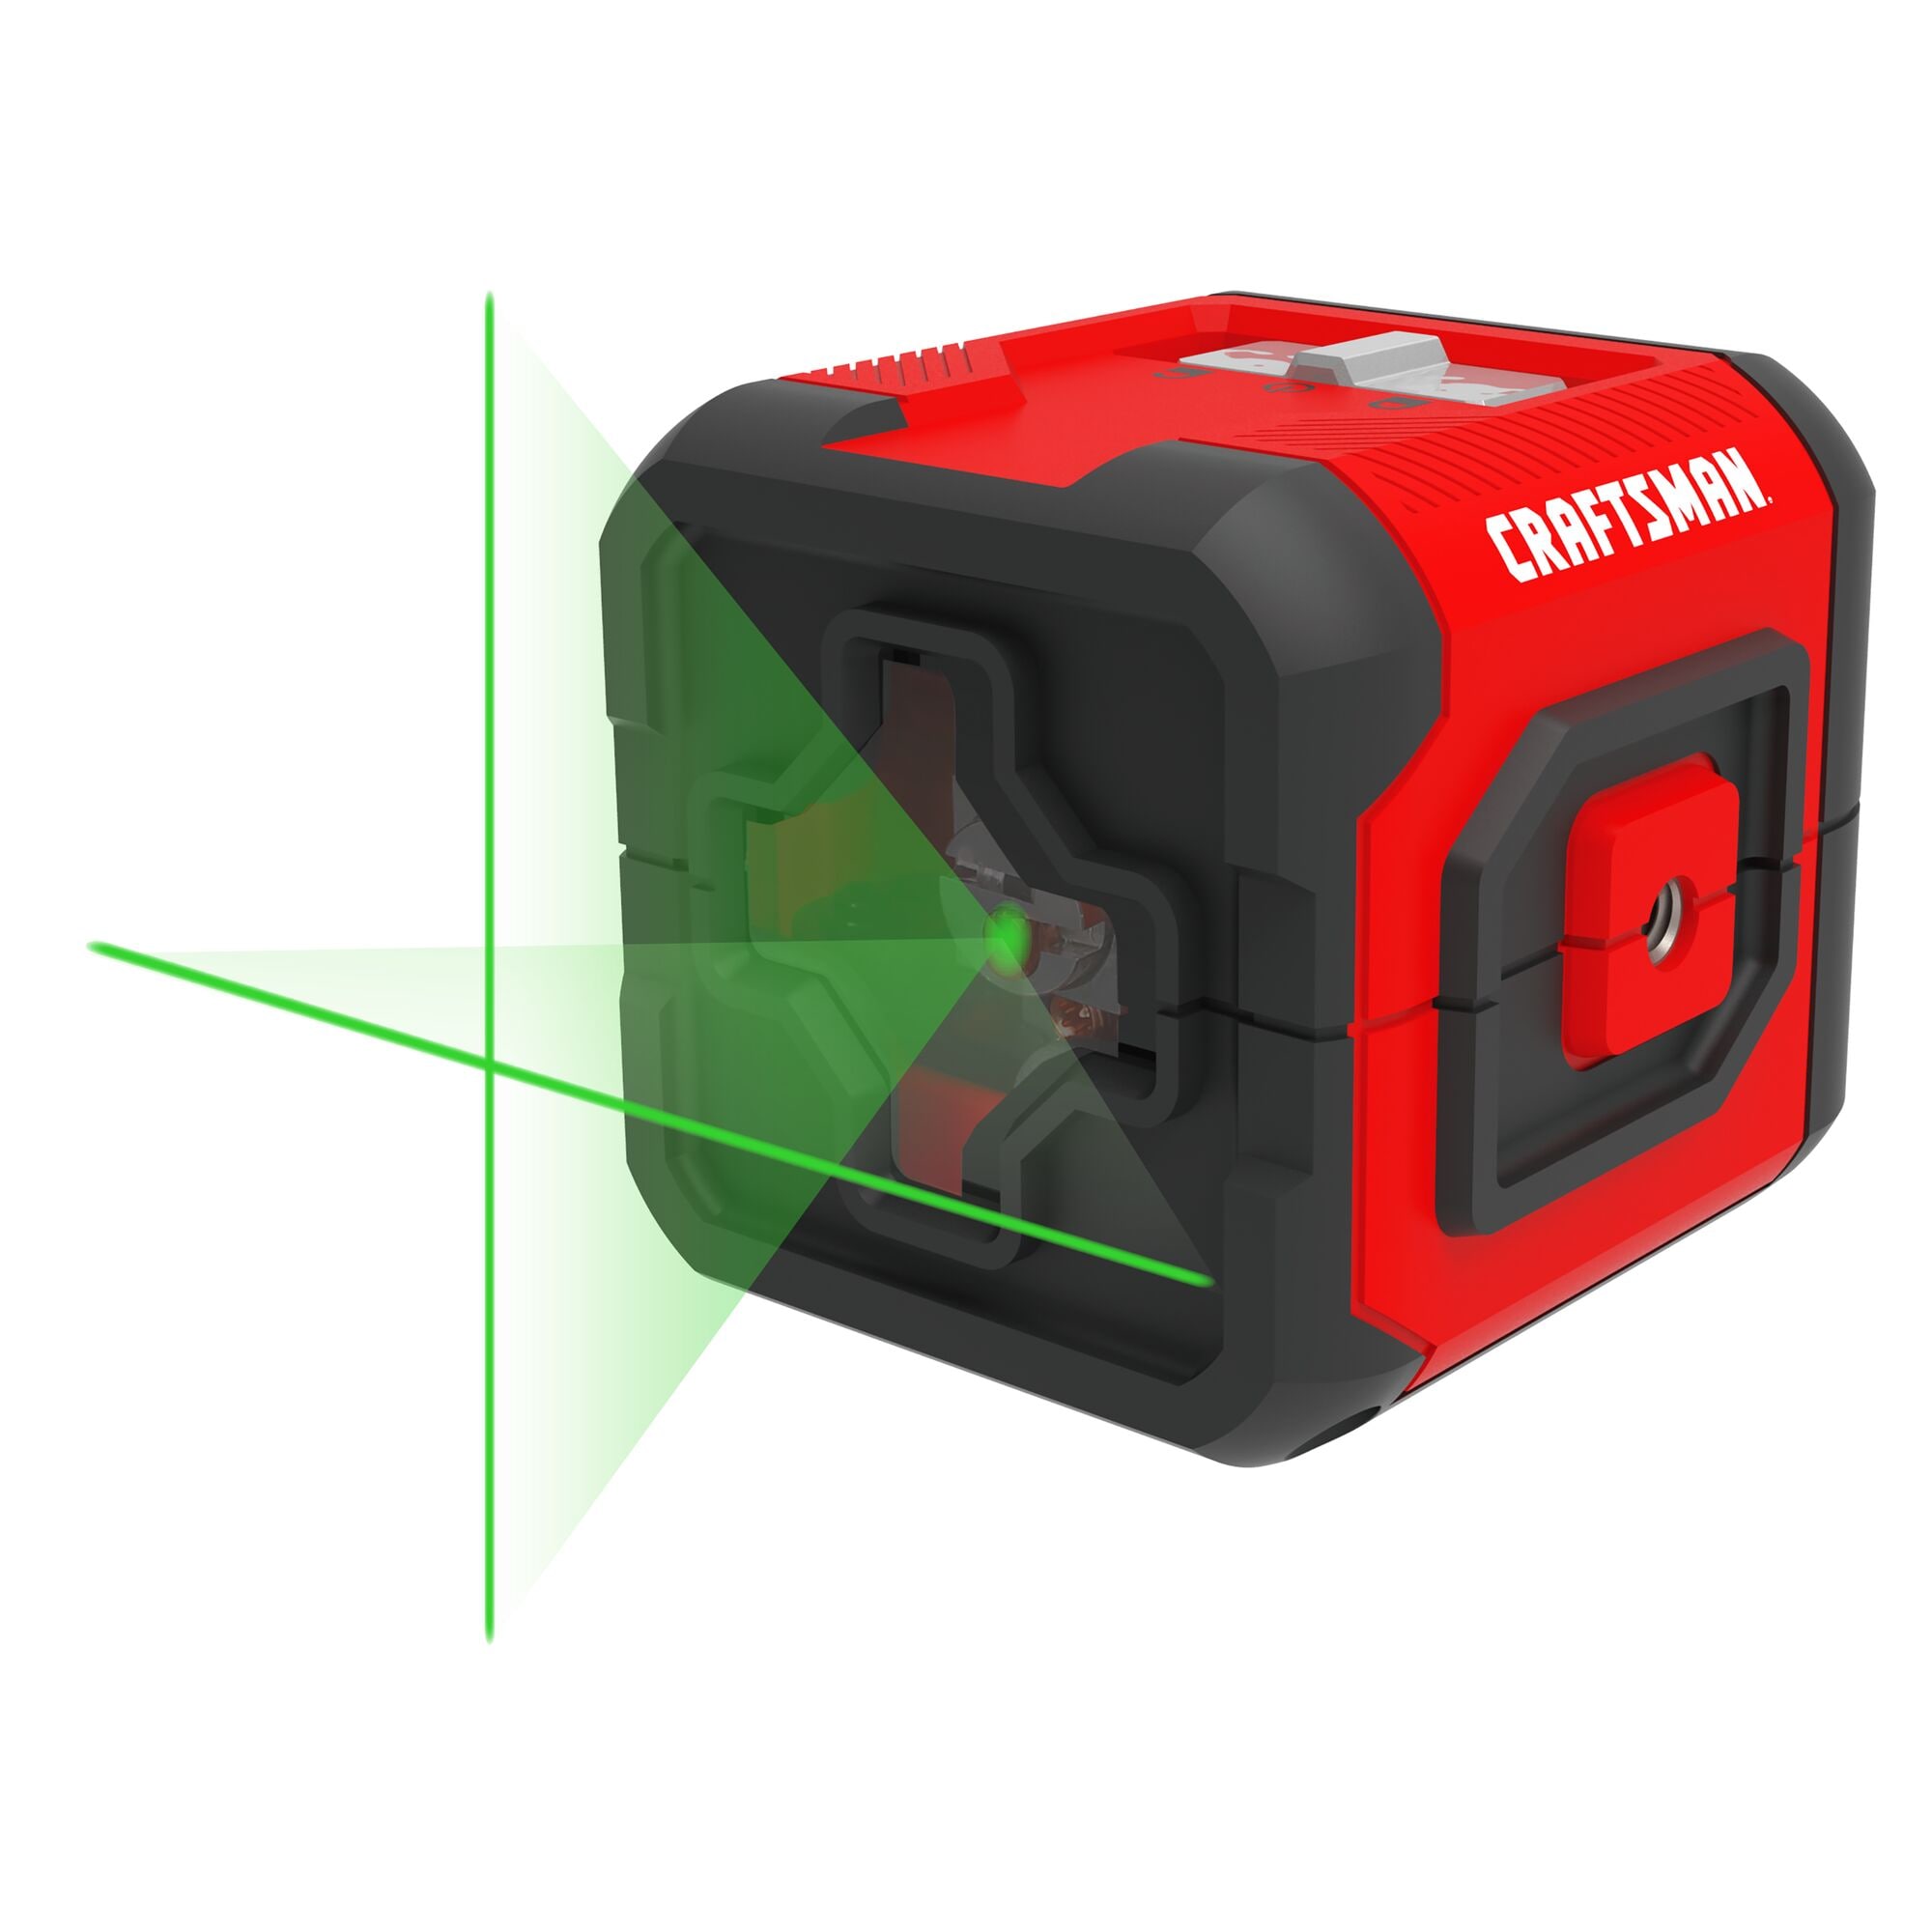 An Introduction to Laser Levels and Laser Level Accessories